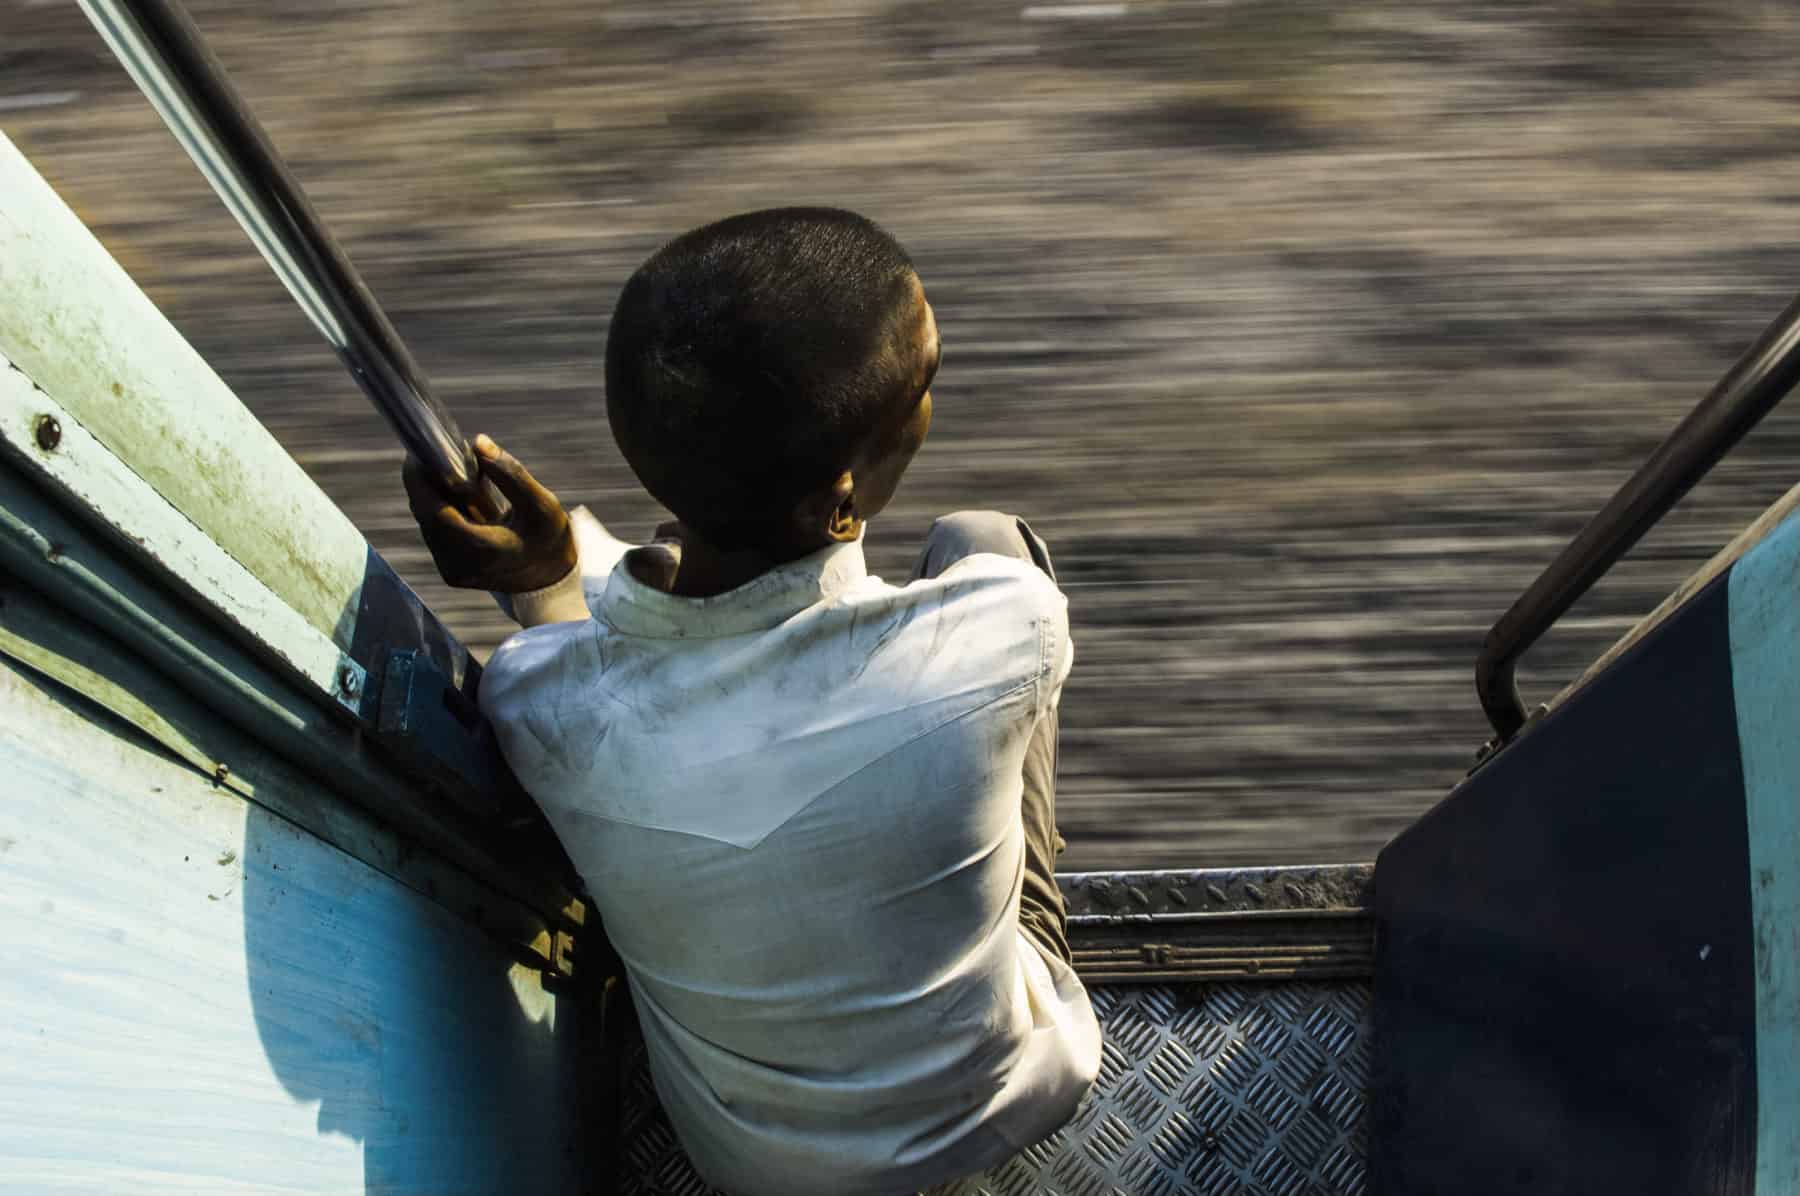 a passenger in a train looking outside, india